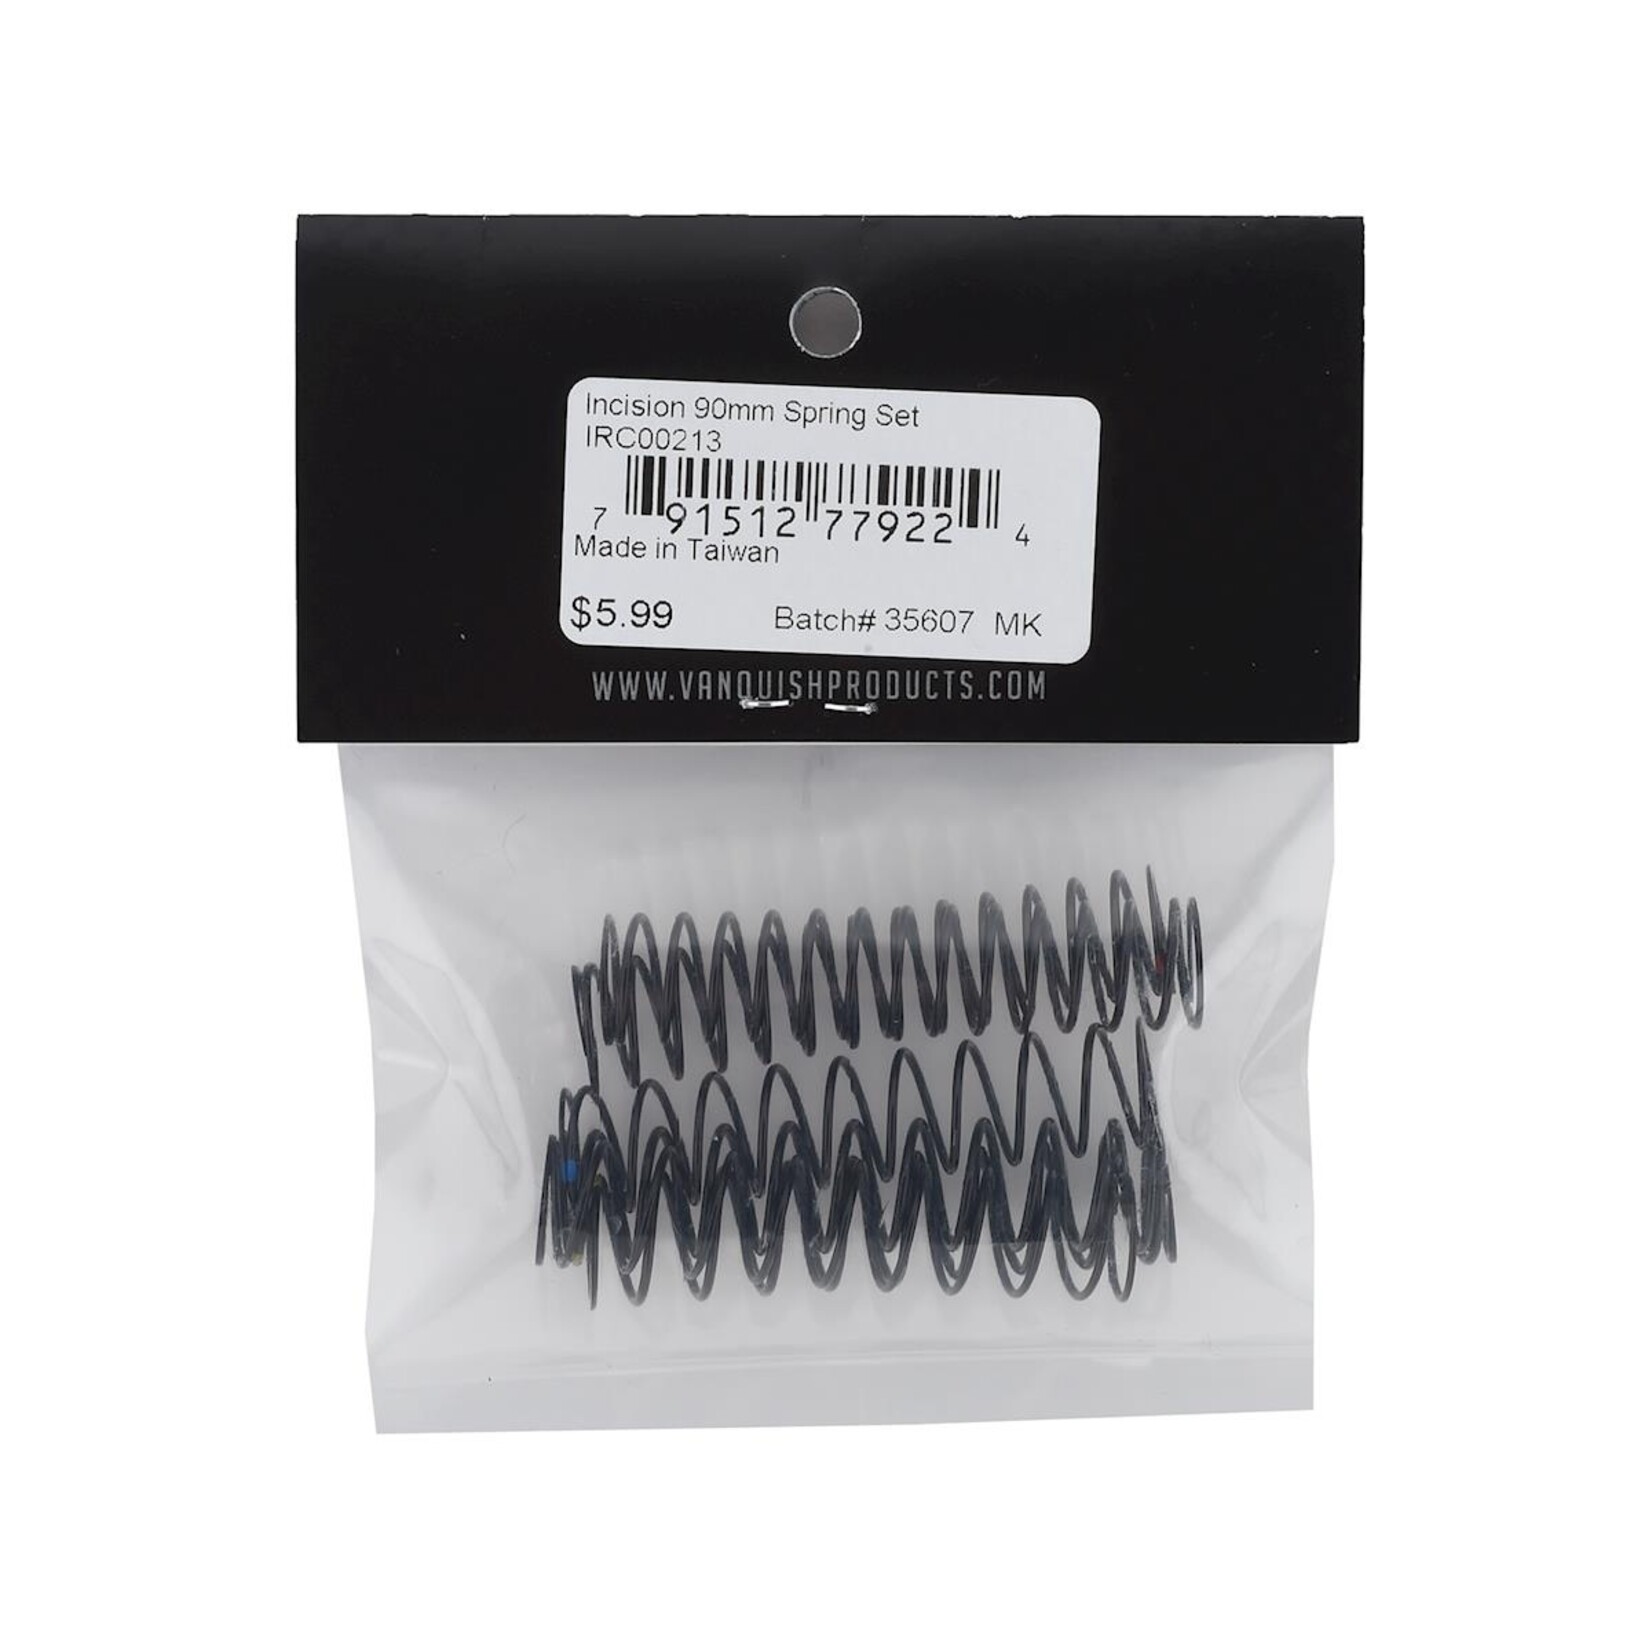 Incision Incision Scale Shock Springs Set #IRC00213